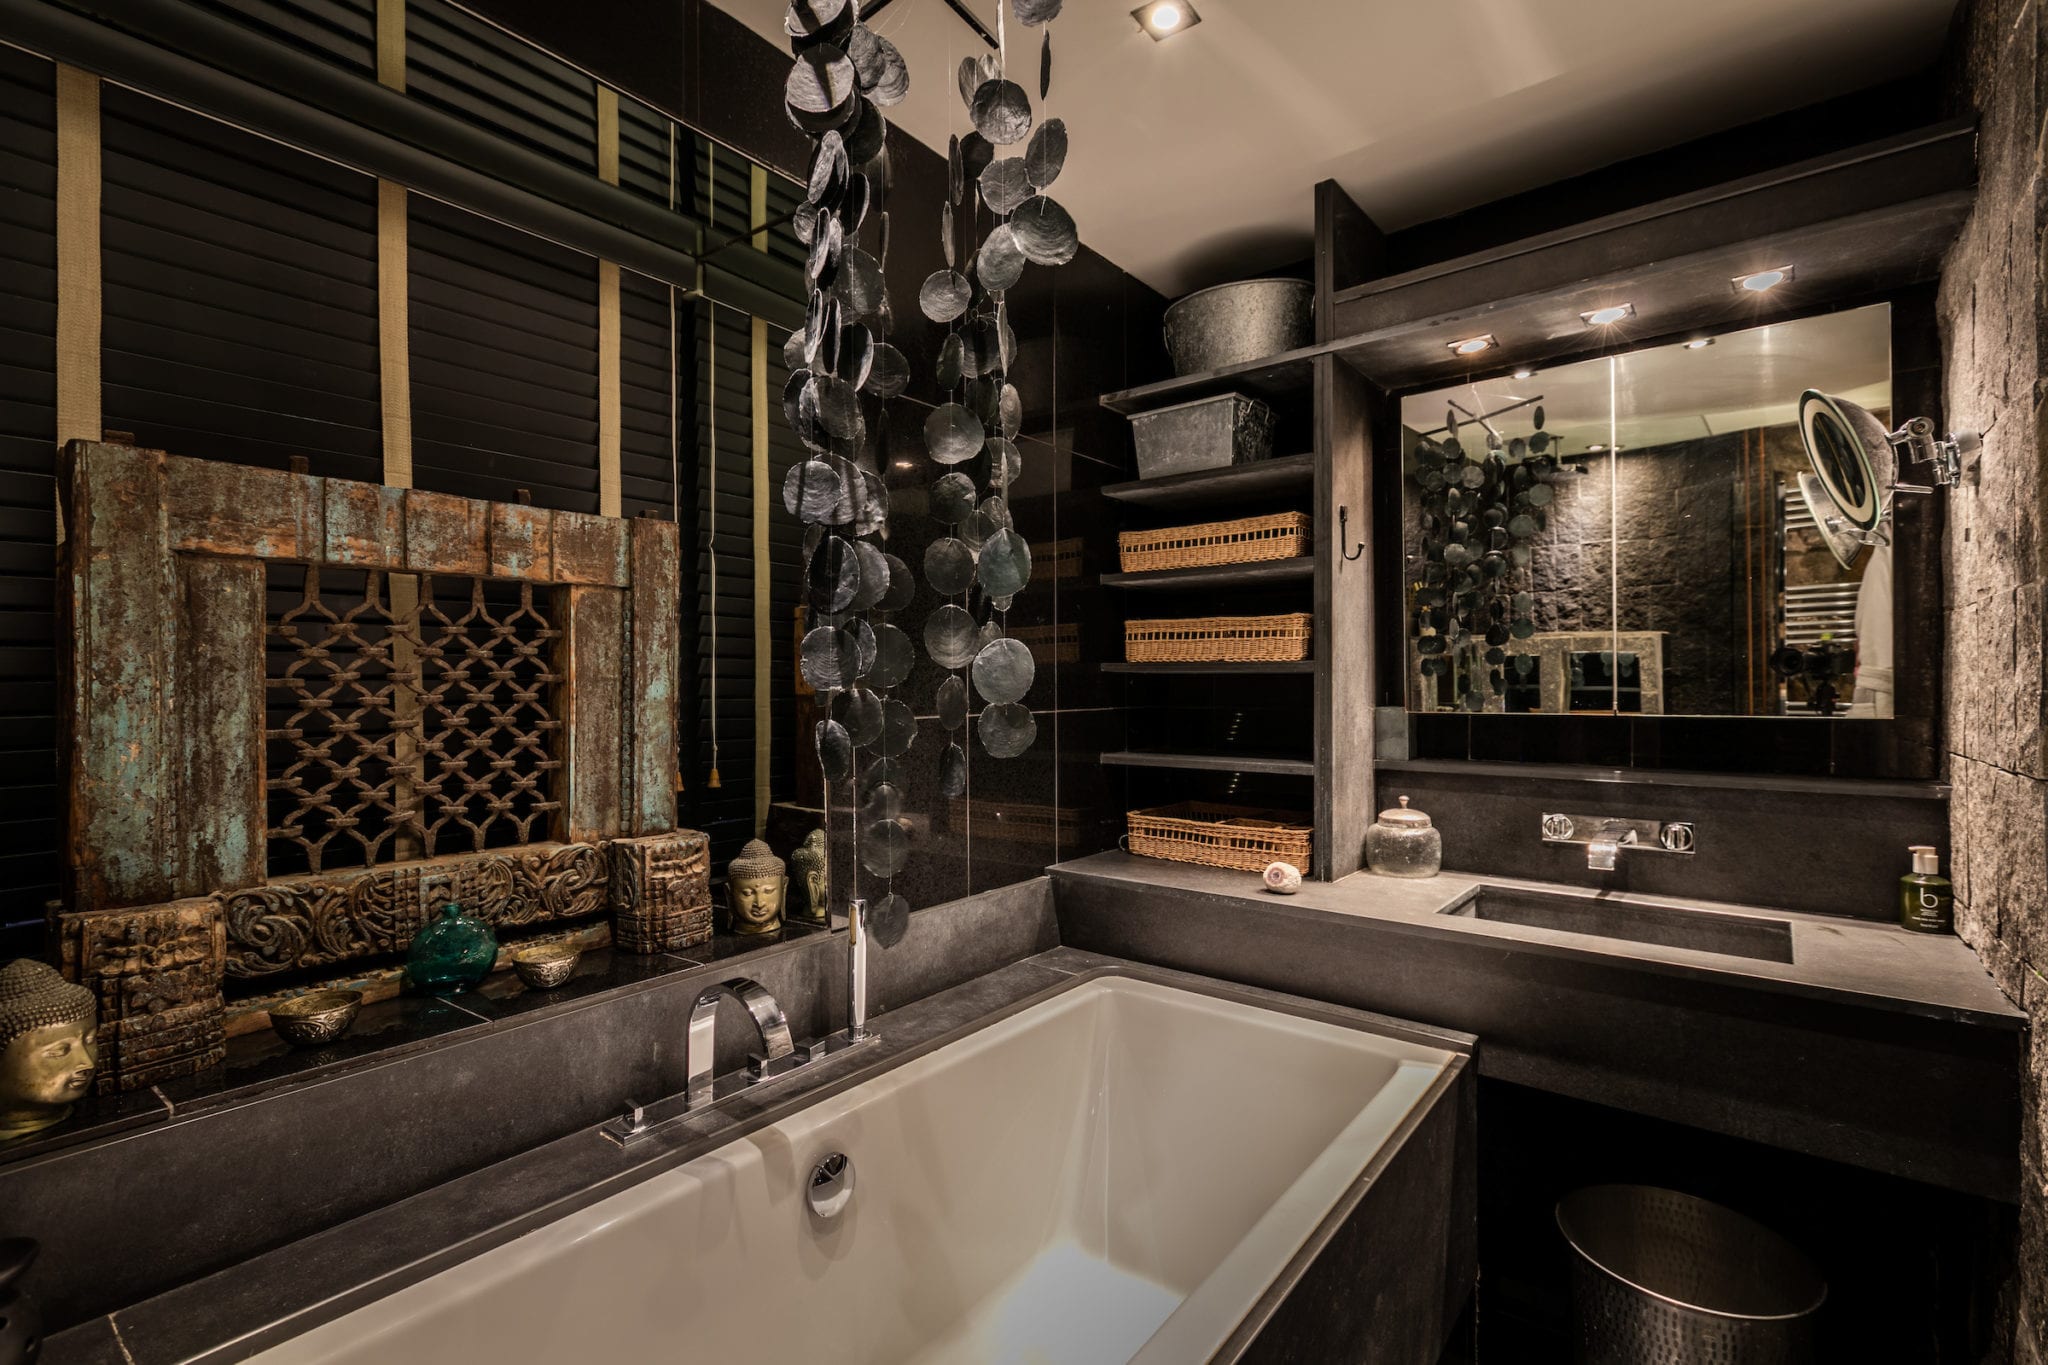 A black granite bathroom with moroccan features